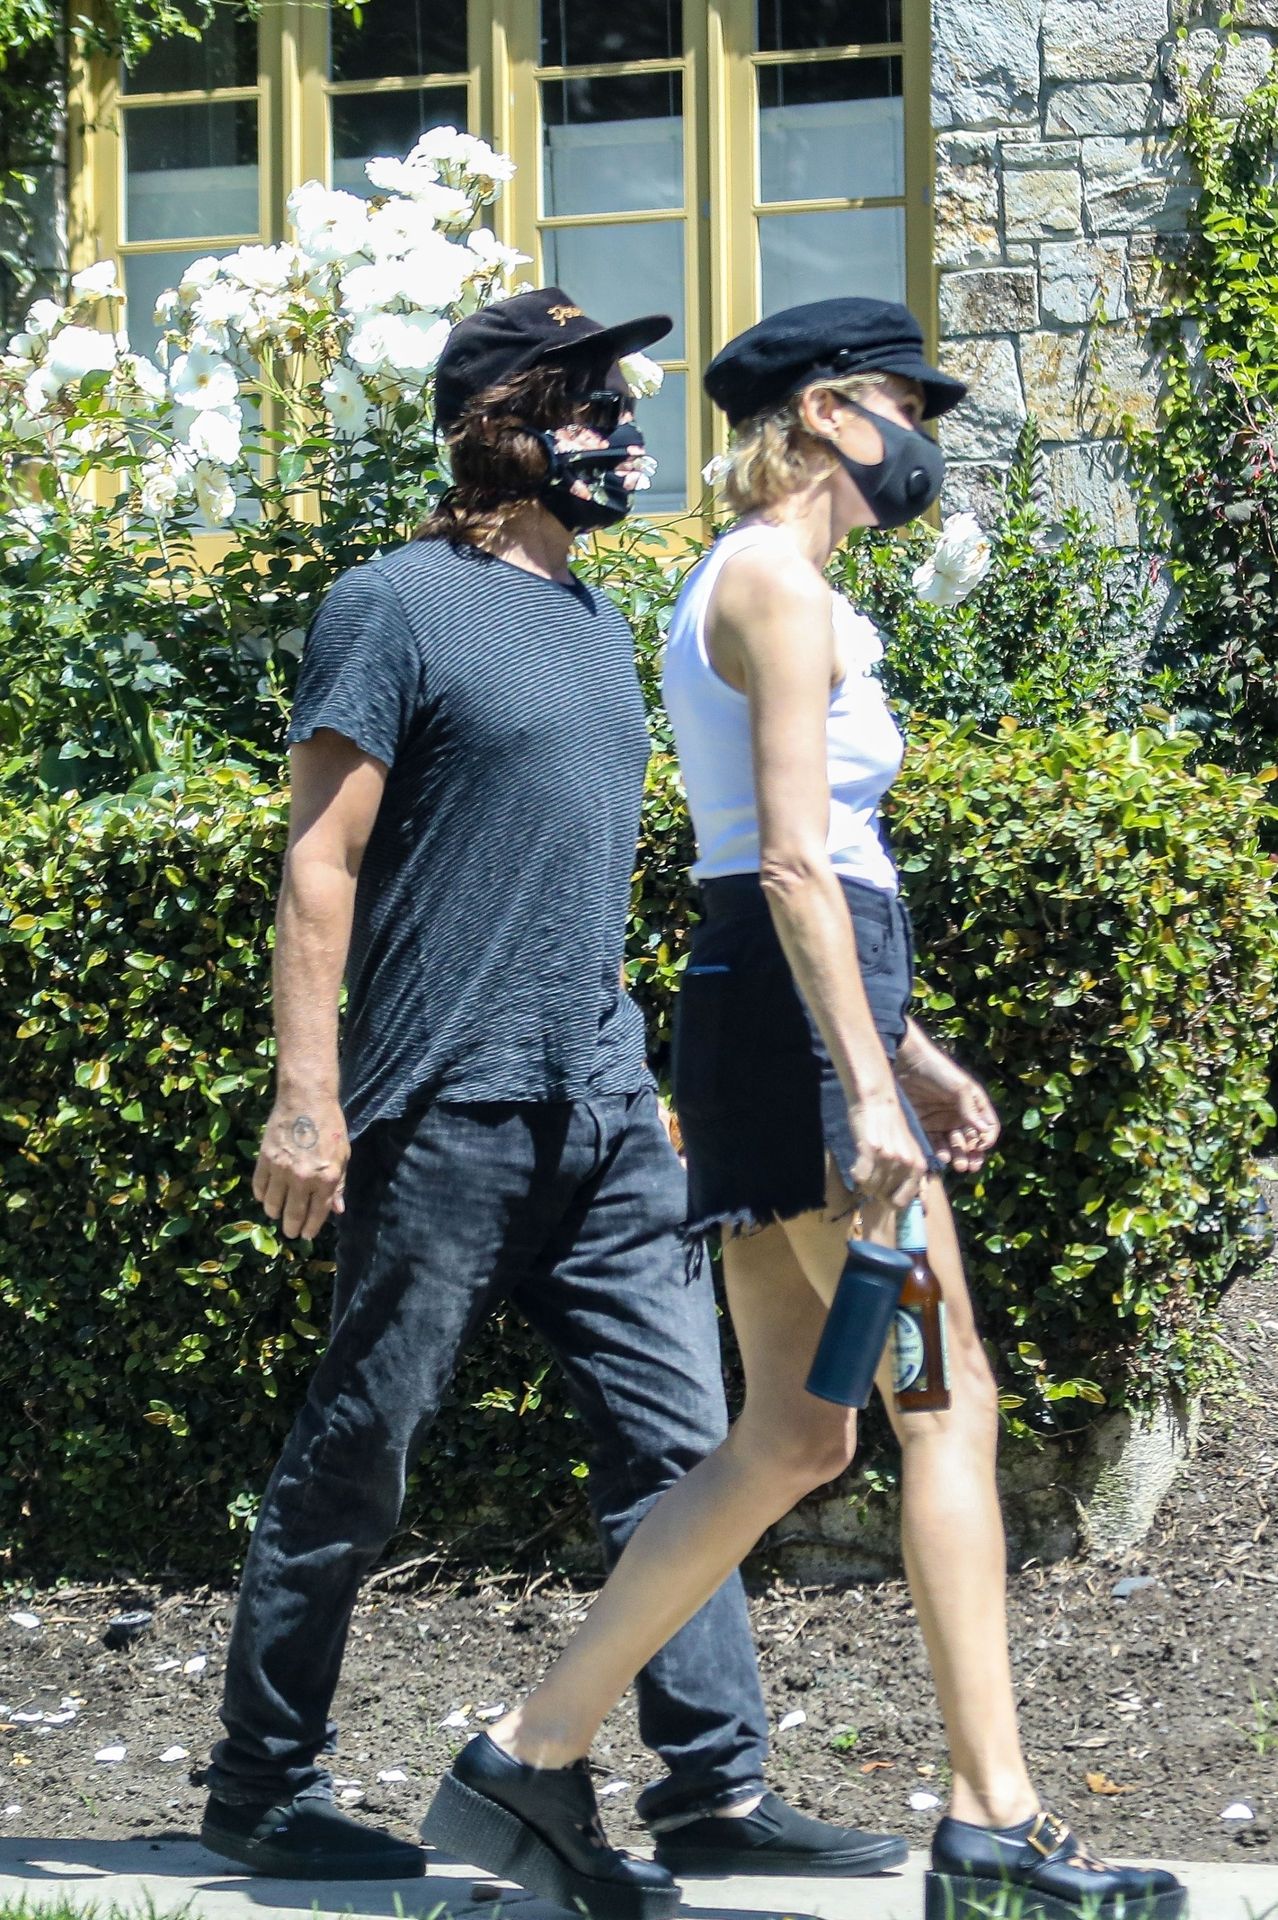 Diane Kruger  Norman Reedus Attend a House Party During the COVID-19 Outbreak (27 Photos)